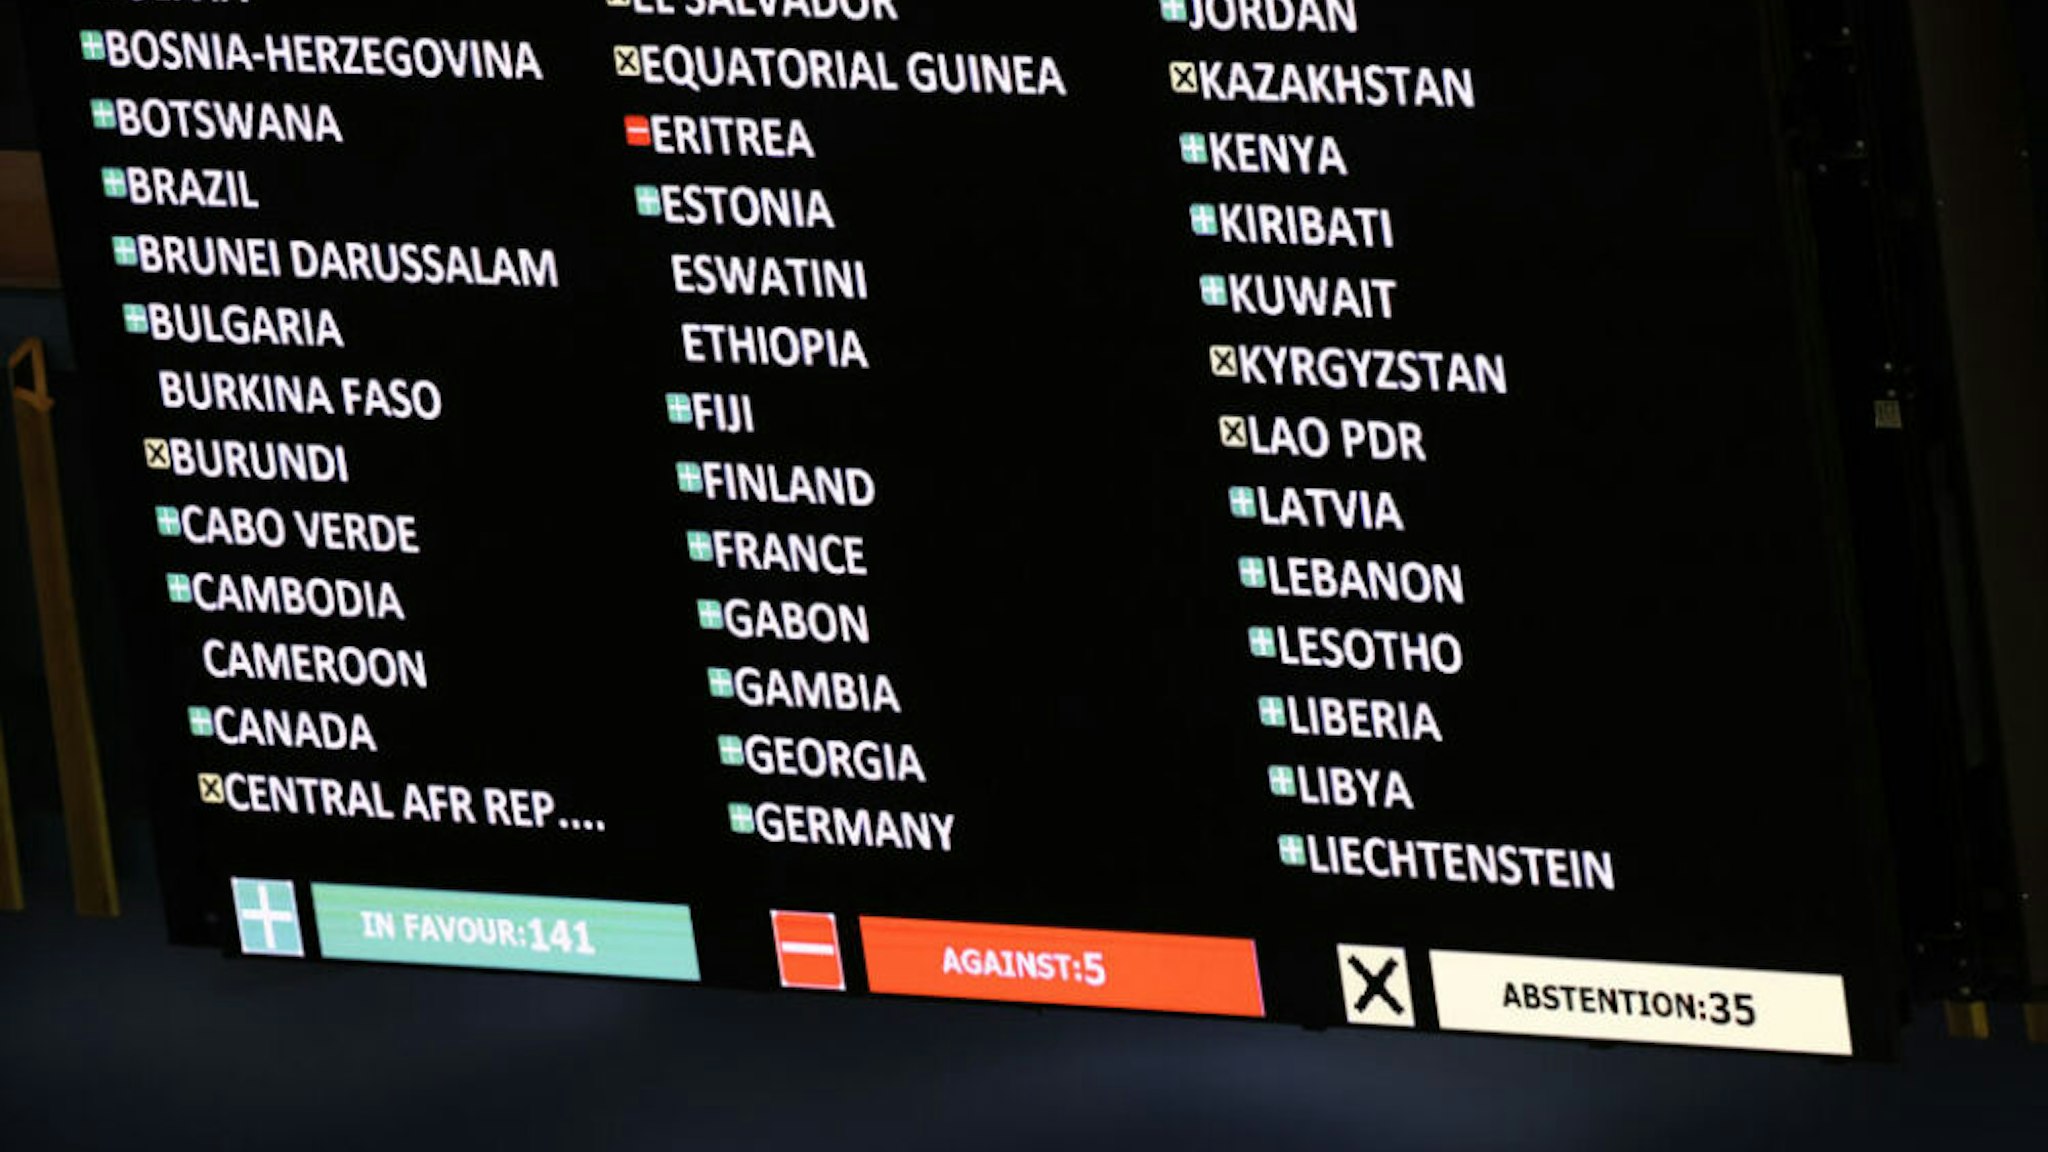 NEW YORK, NEW YORK - MARCH 02: The results of a General Assembly vote on a resolution is shown on a screen during a special session of the General Assembly at the United Nations headquarters on March 02, 2022 in New York City. The U.N. General Assembly continued its 11th Emergency Special Session where a vote was held on a draft resolution to condemn Russia over the invasion of Ukraine. Since the start of the war seven days ago, there have been over 600,000 people who have been displaced in Ukraine according to the U.N. refugee agency. Ukraine’s State Emergency Service have said that more than 2,000 civilians have been killed.